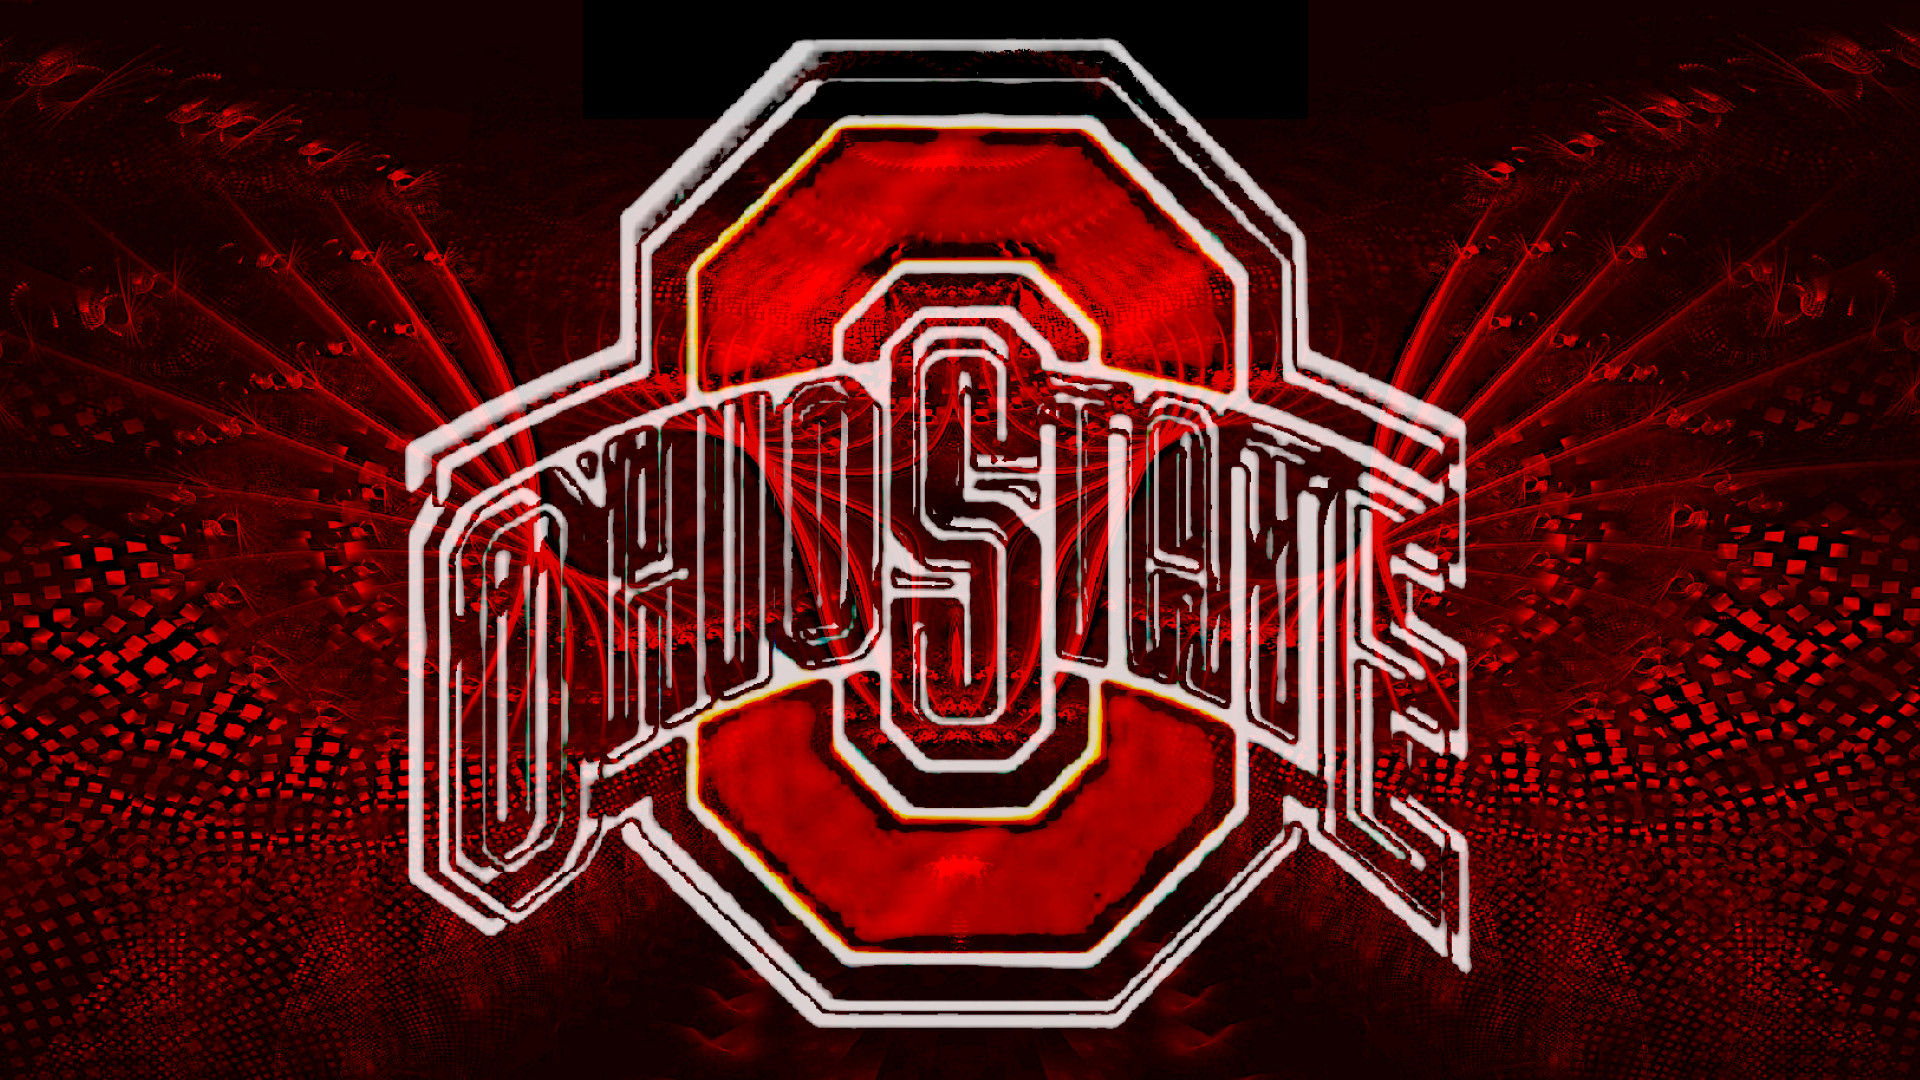 Ohio State Football Wallpaper | HD Wallpapers | Pinterest | Wallpaper and Hd  wallpaper